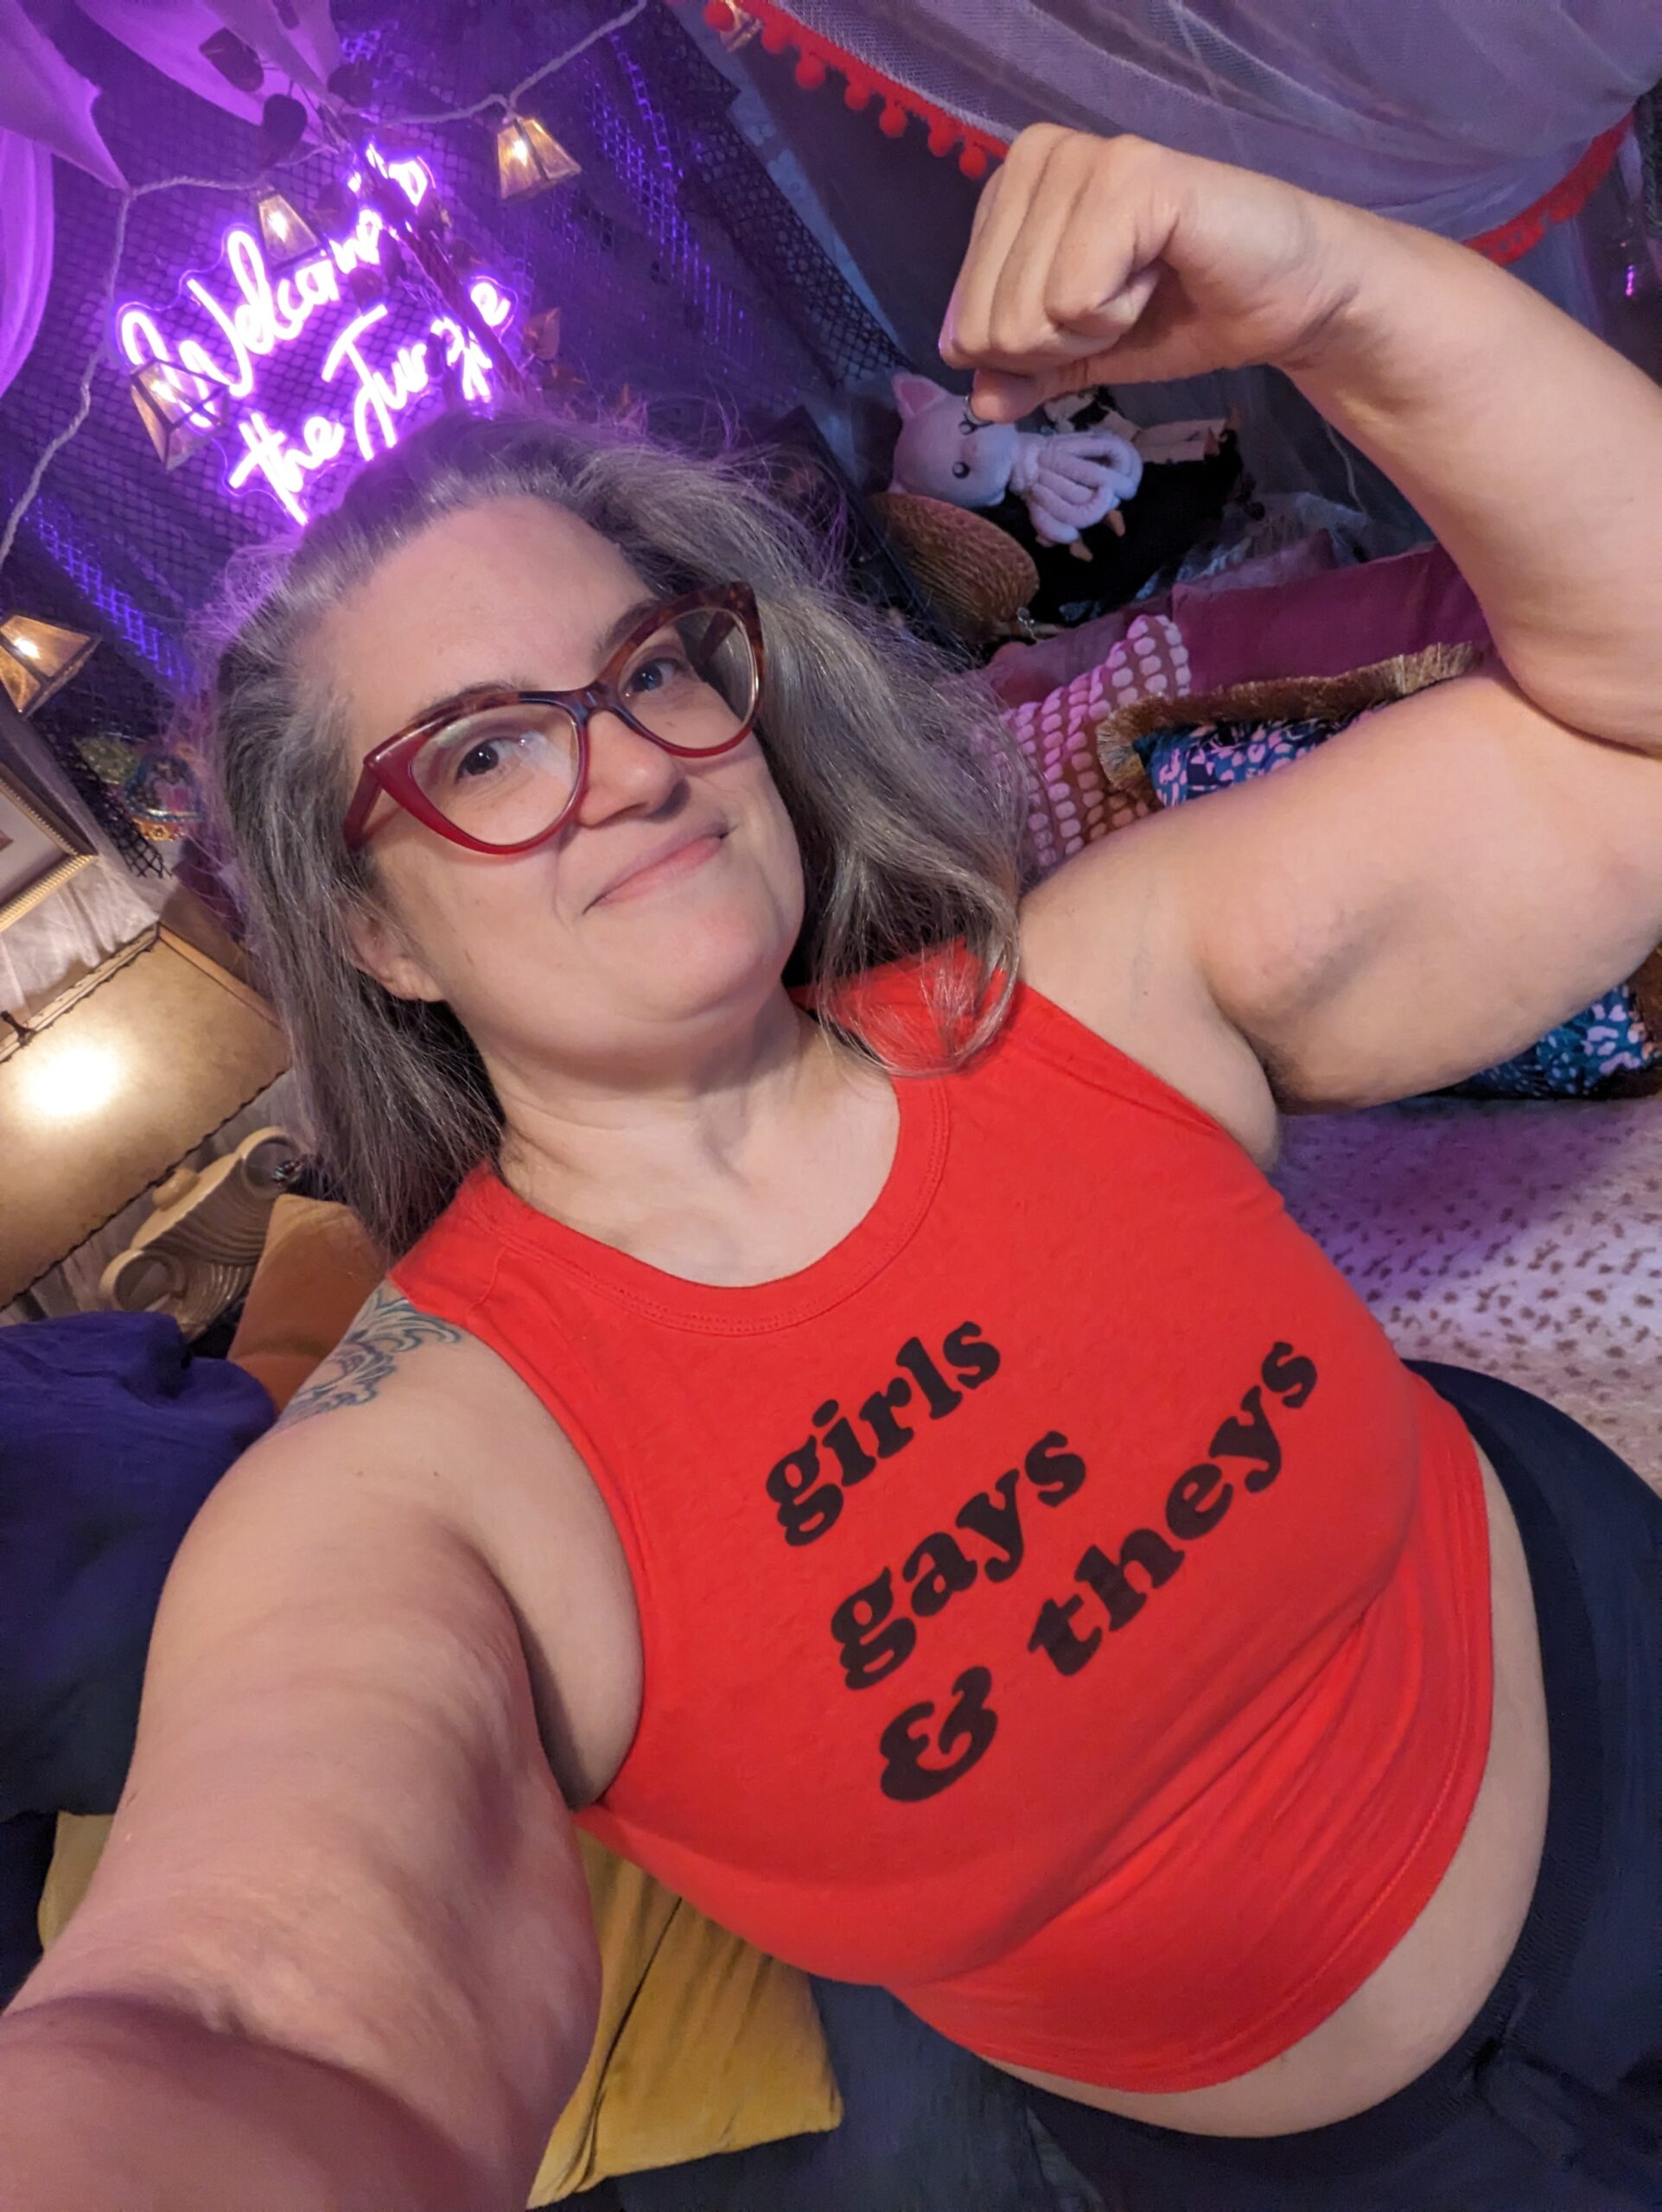 OctoGoddess flexes her left bicep and wears a tight red tank top that reads "girls, gays and theys"